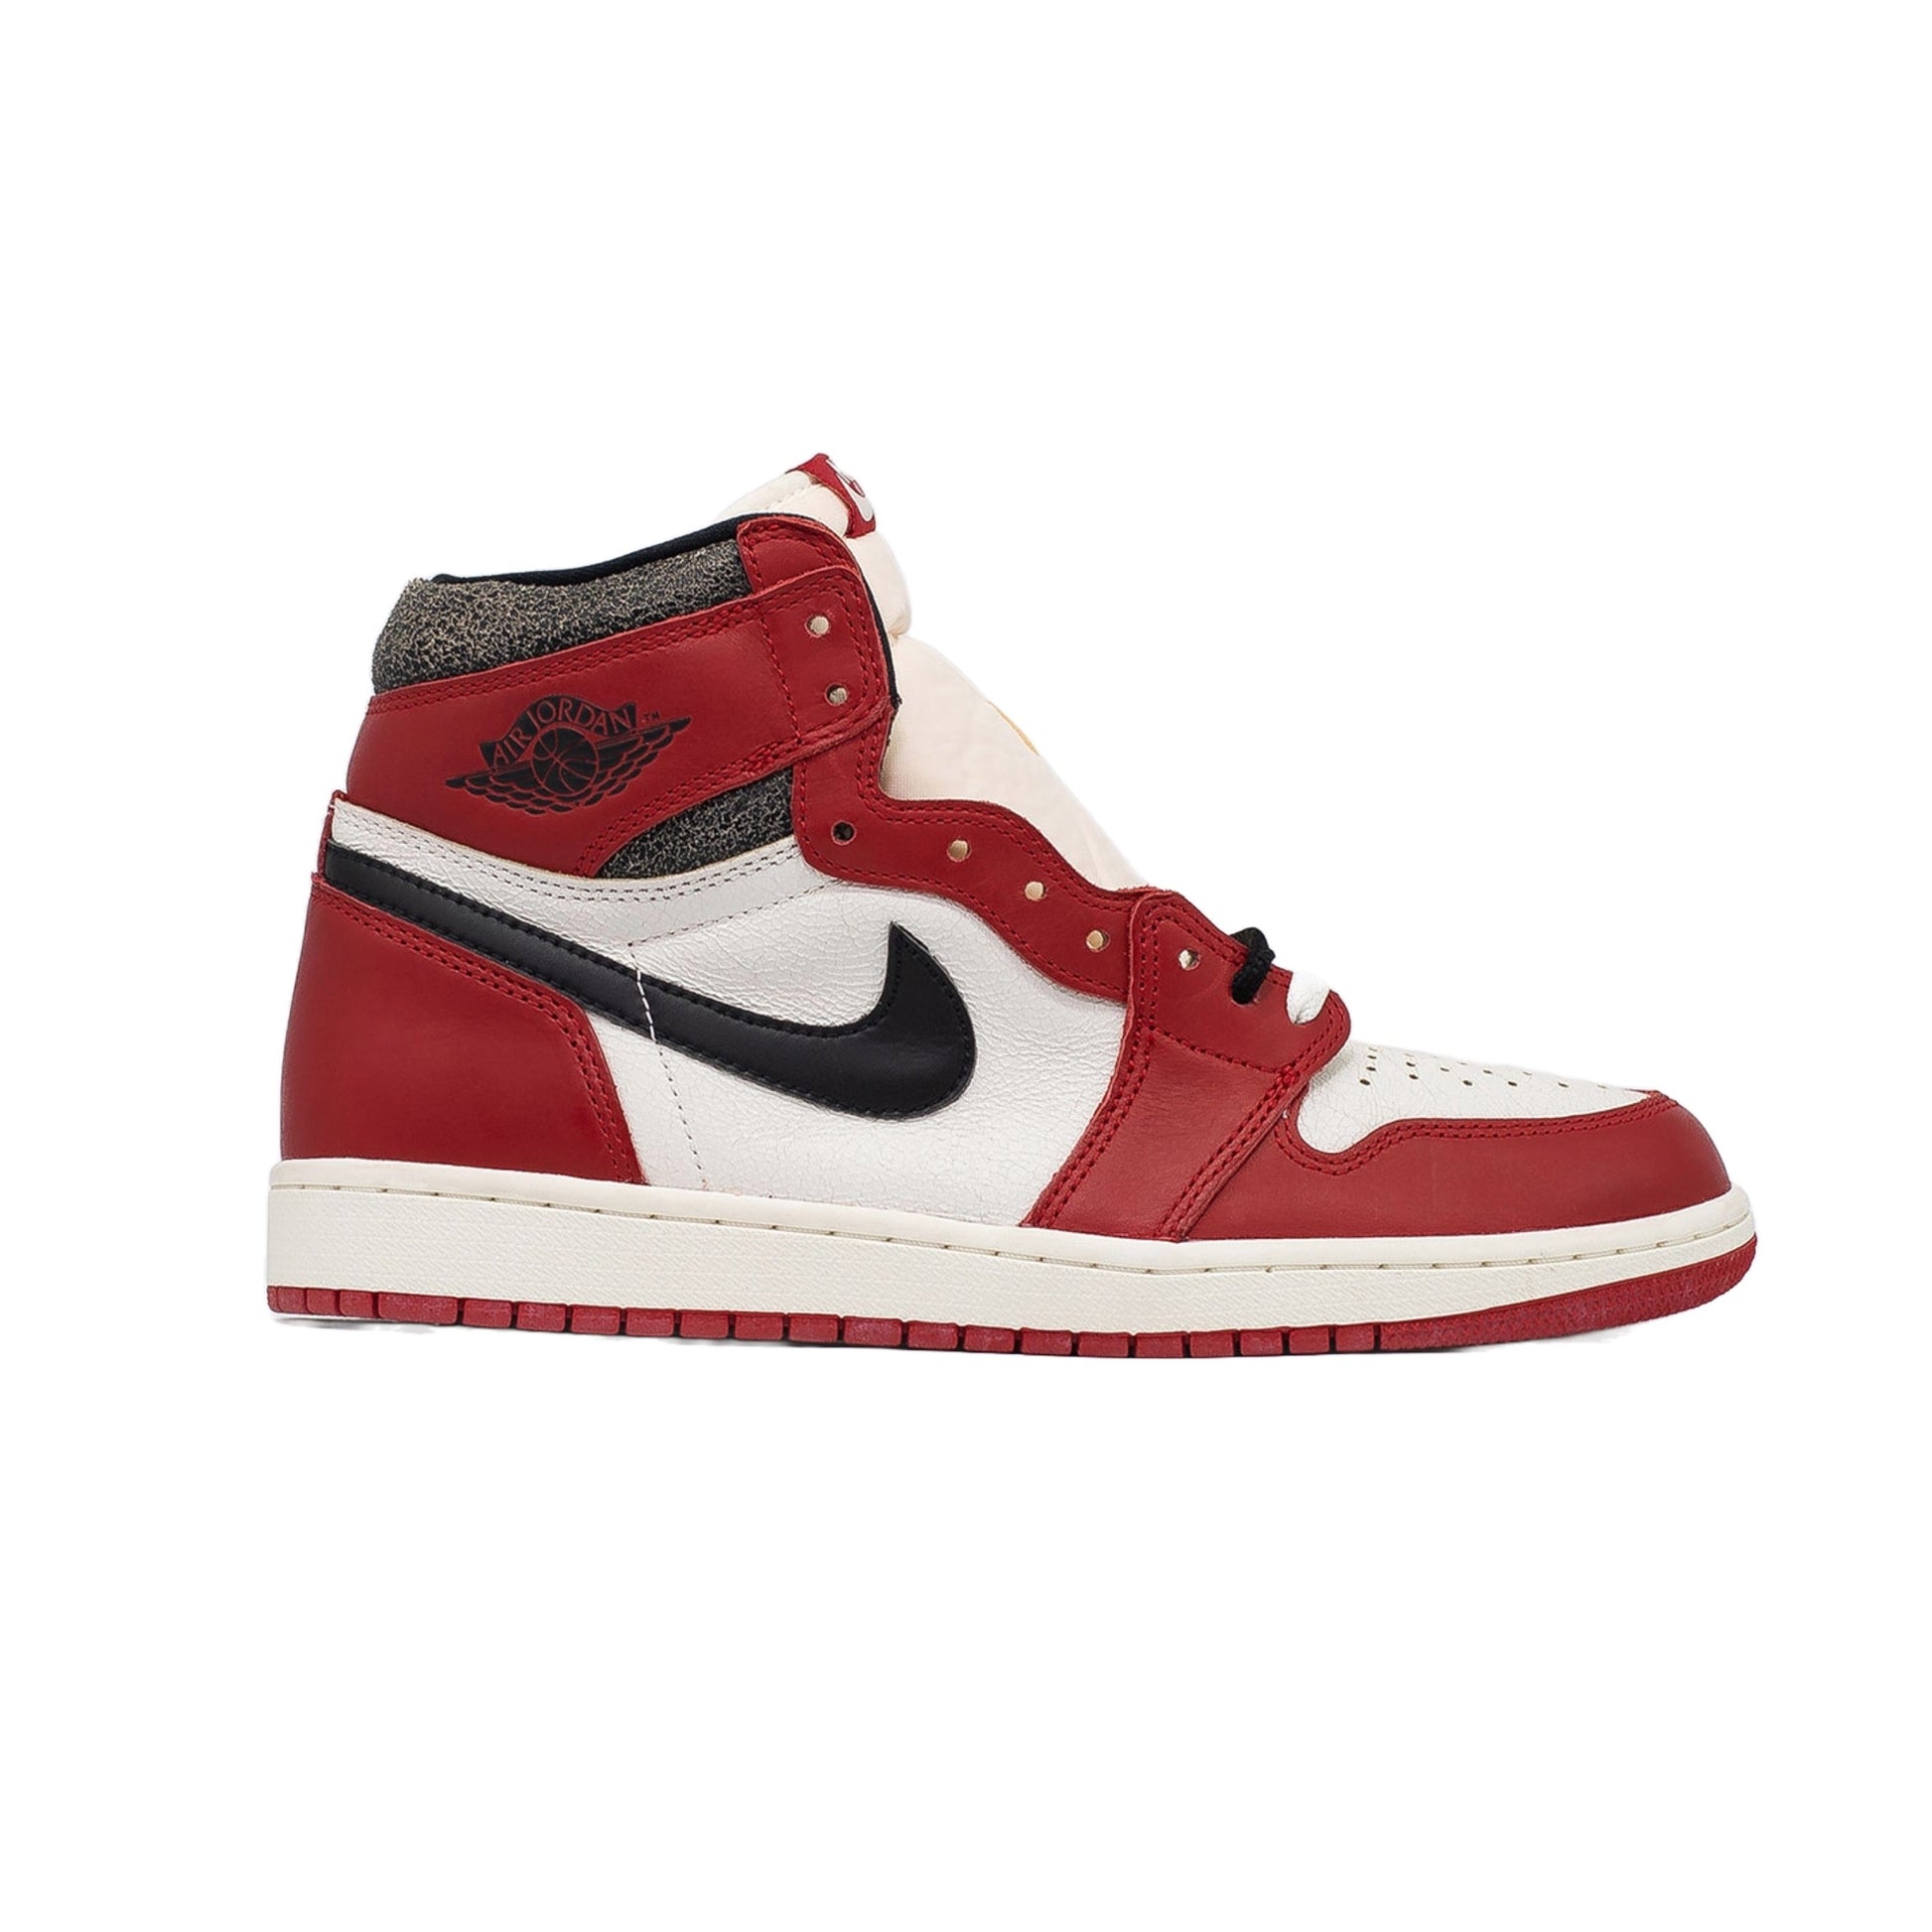 Air air jordan 1 high shadow 2 release info (GS), Chicago Lost And Found